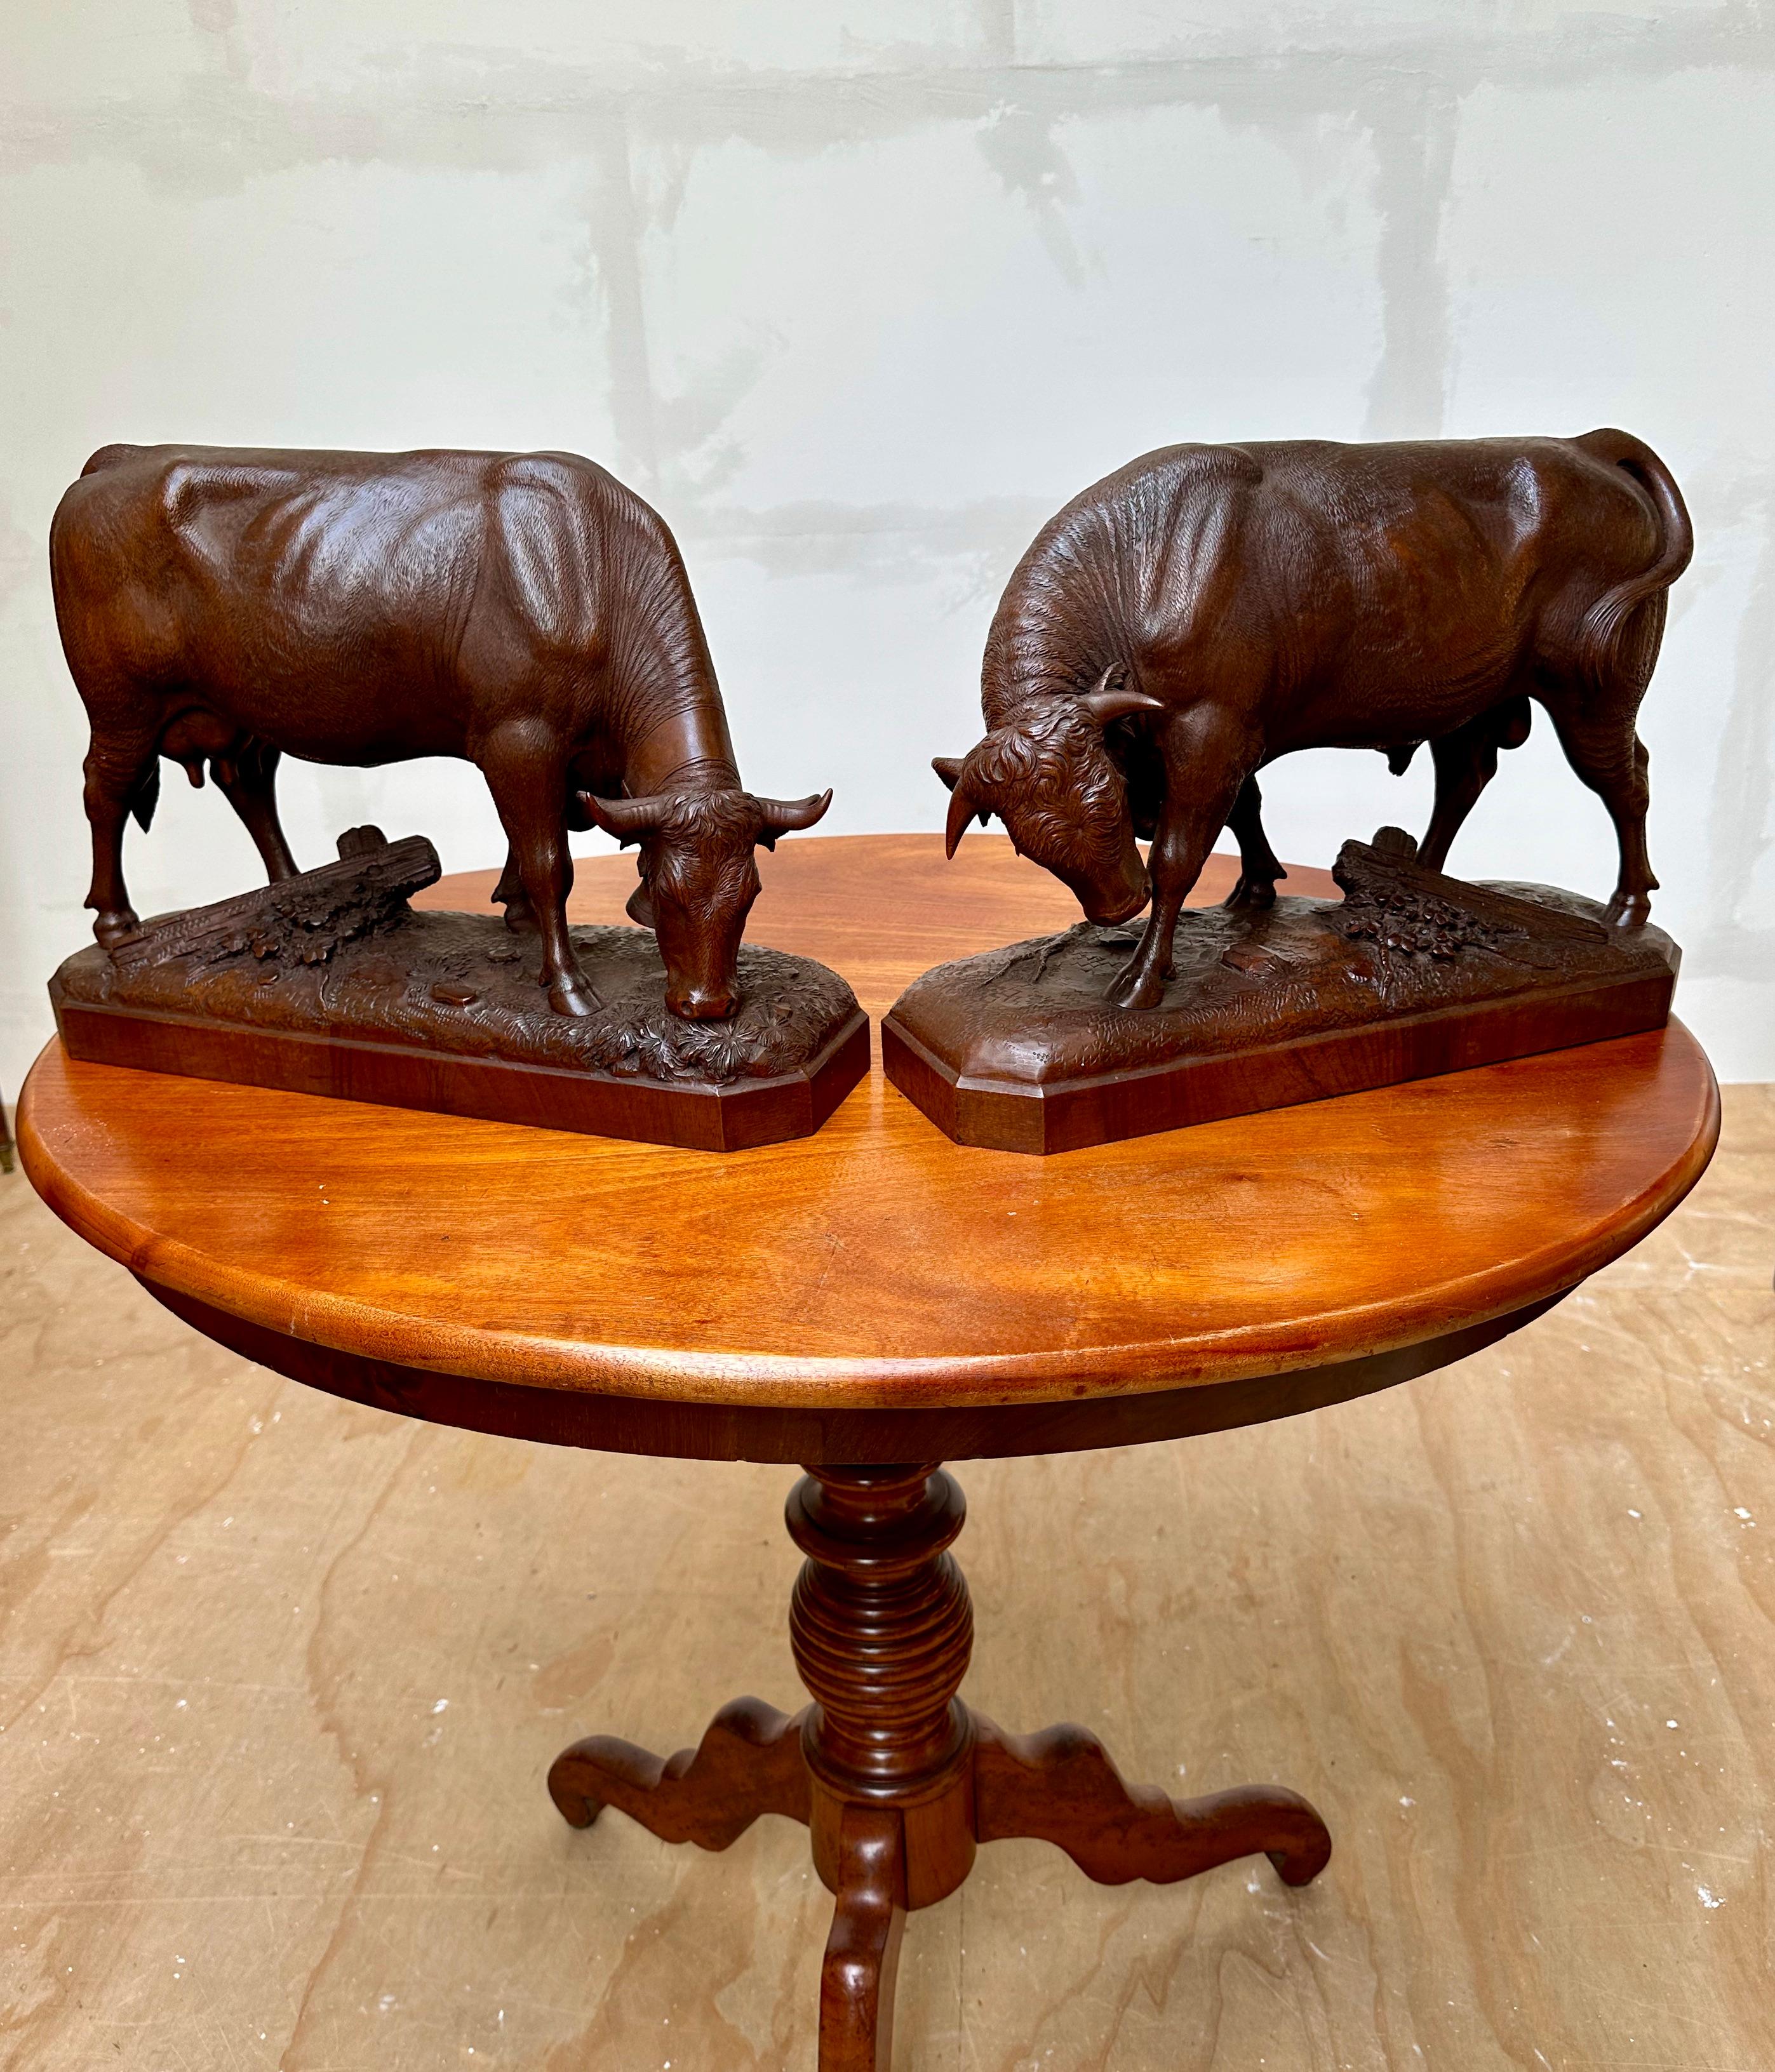 19th Century Large Pair & Finest Quality, Antique Nutwood Swiss Black Forest Bull and Cow